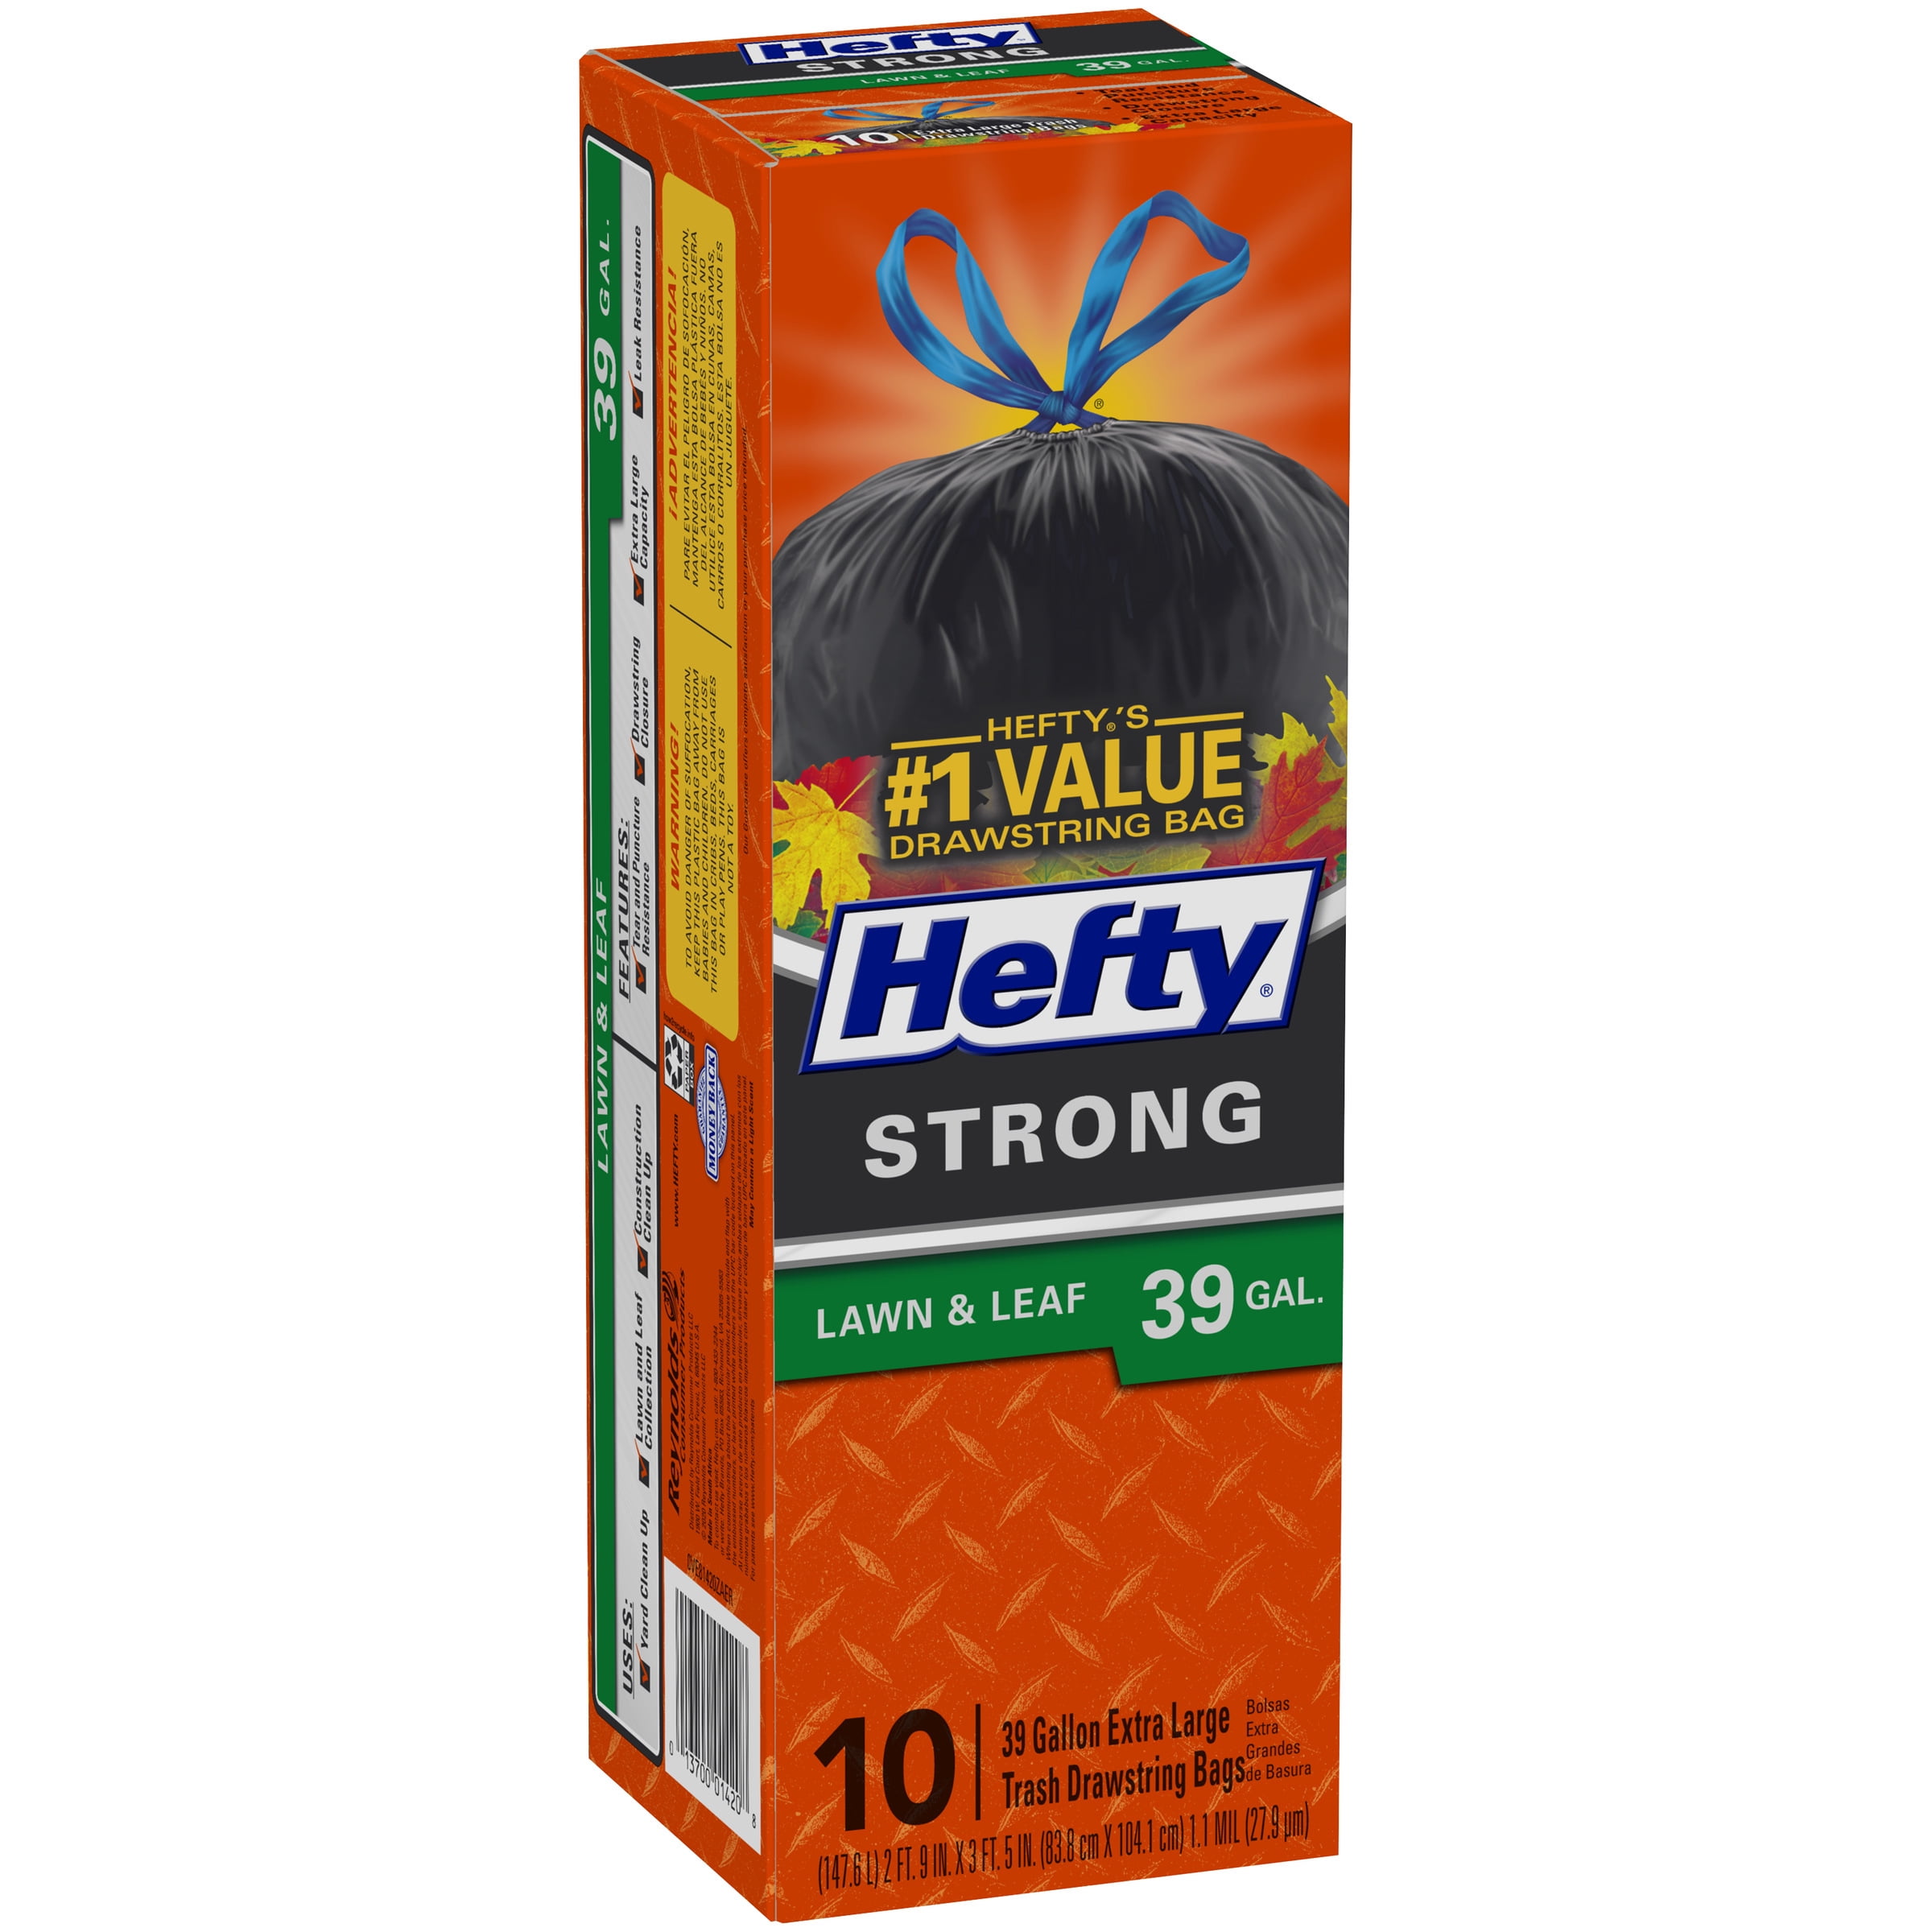 6 Pack Hefty Strong 39-Gallon Lawn & Leaf Trash Bags (34 Bags Each) New